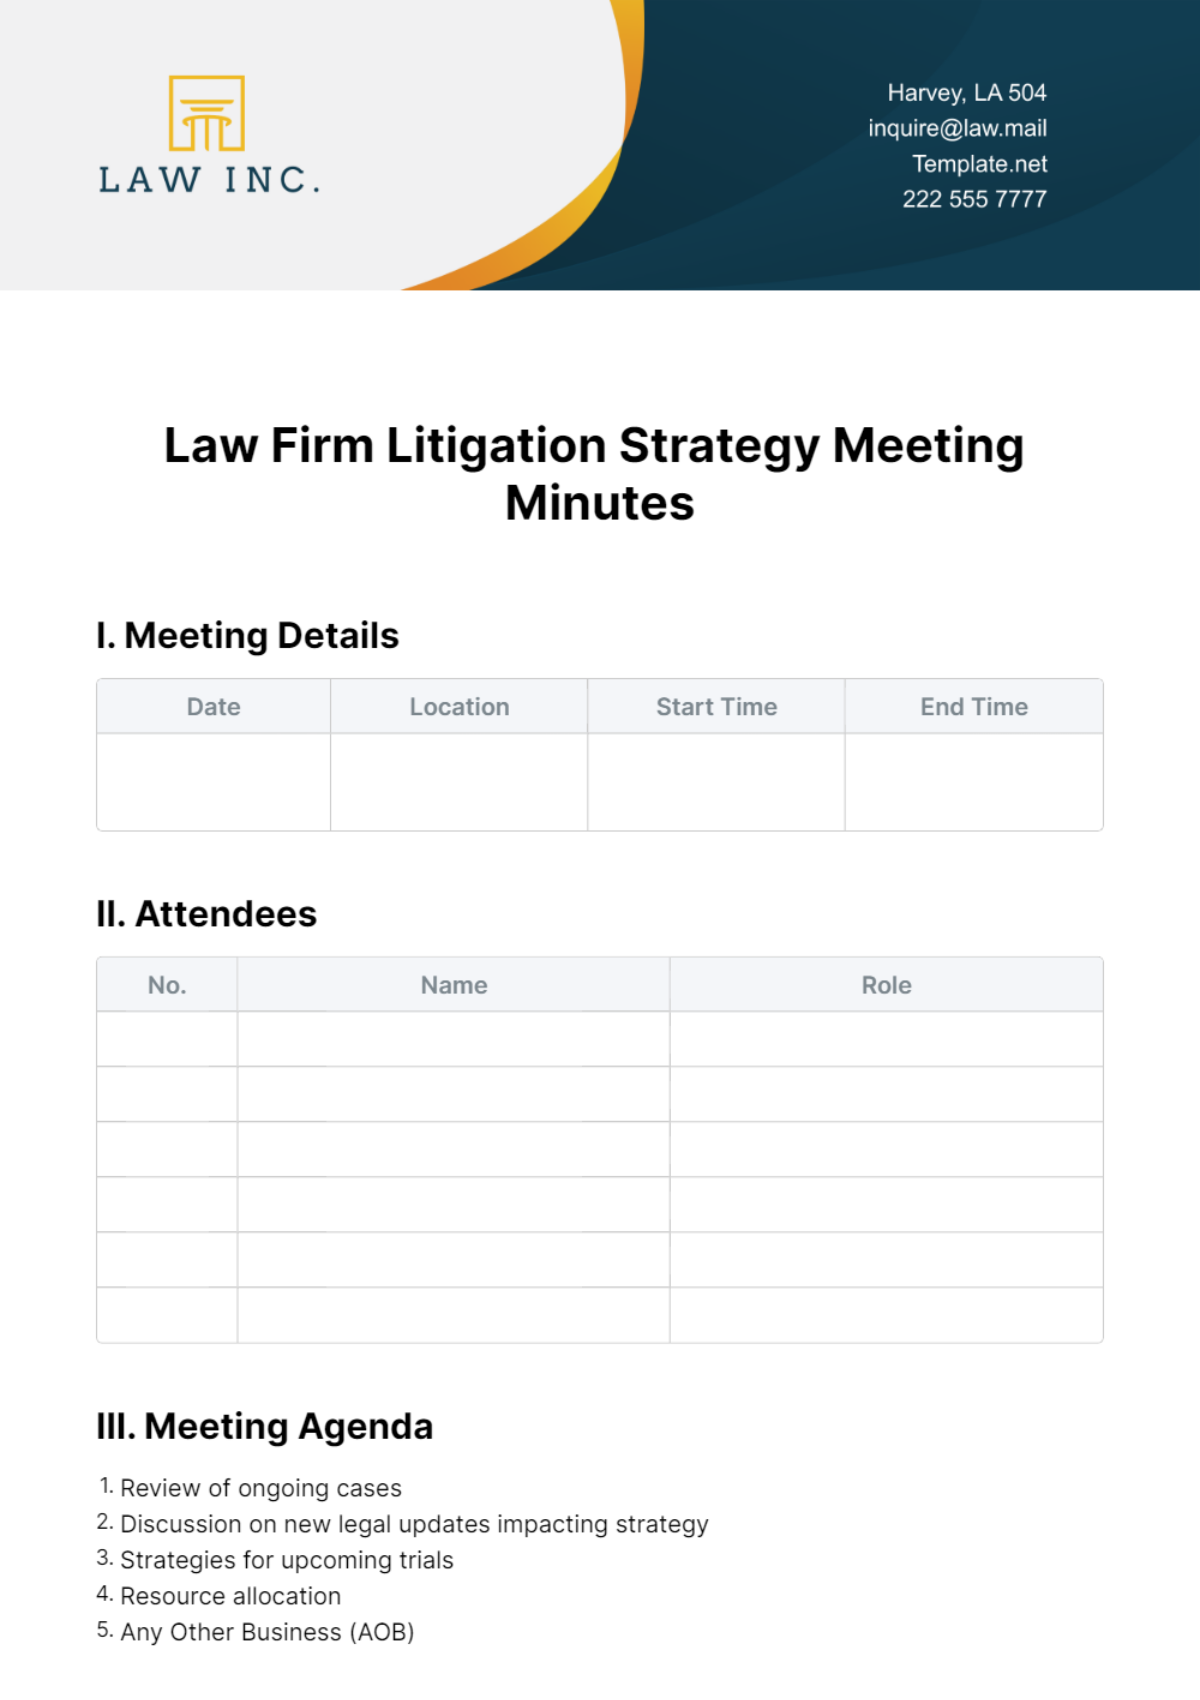 Law Firm Litigation Strategy Meeting Minutes Template